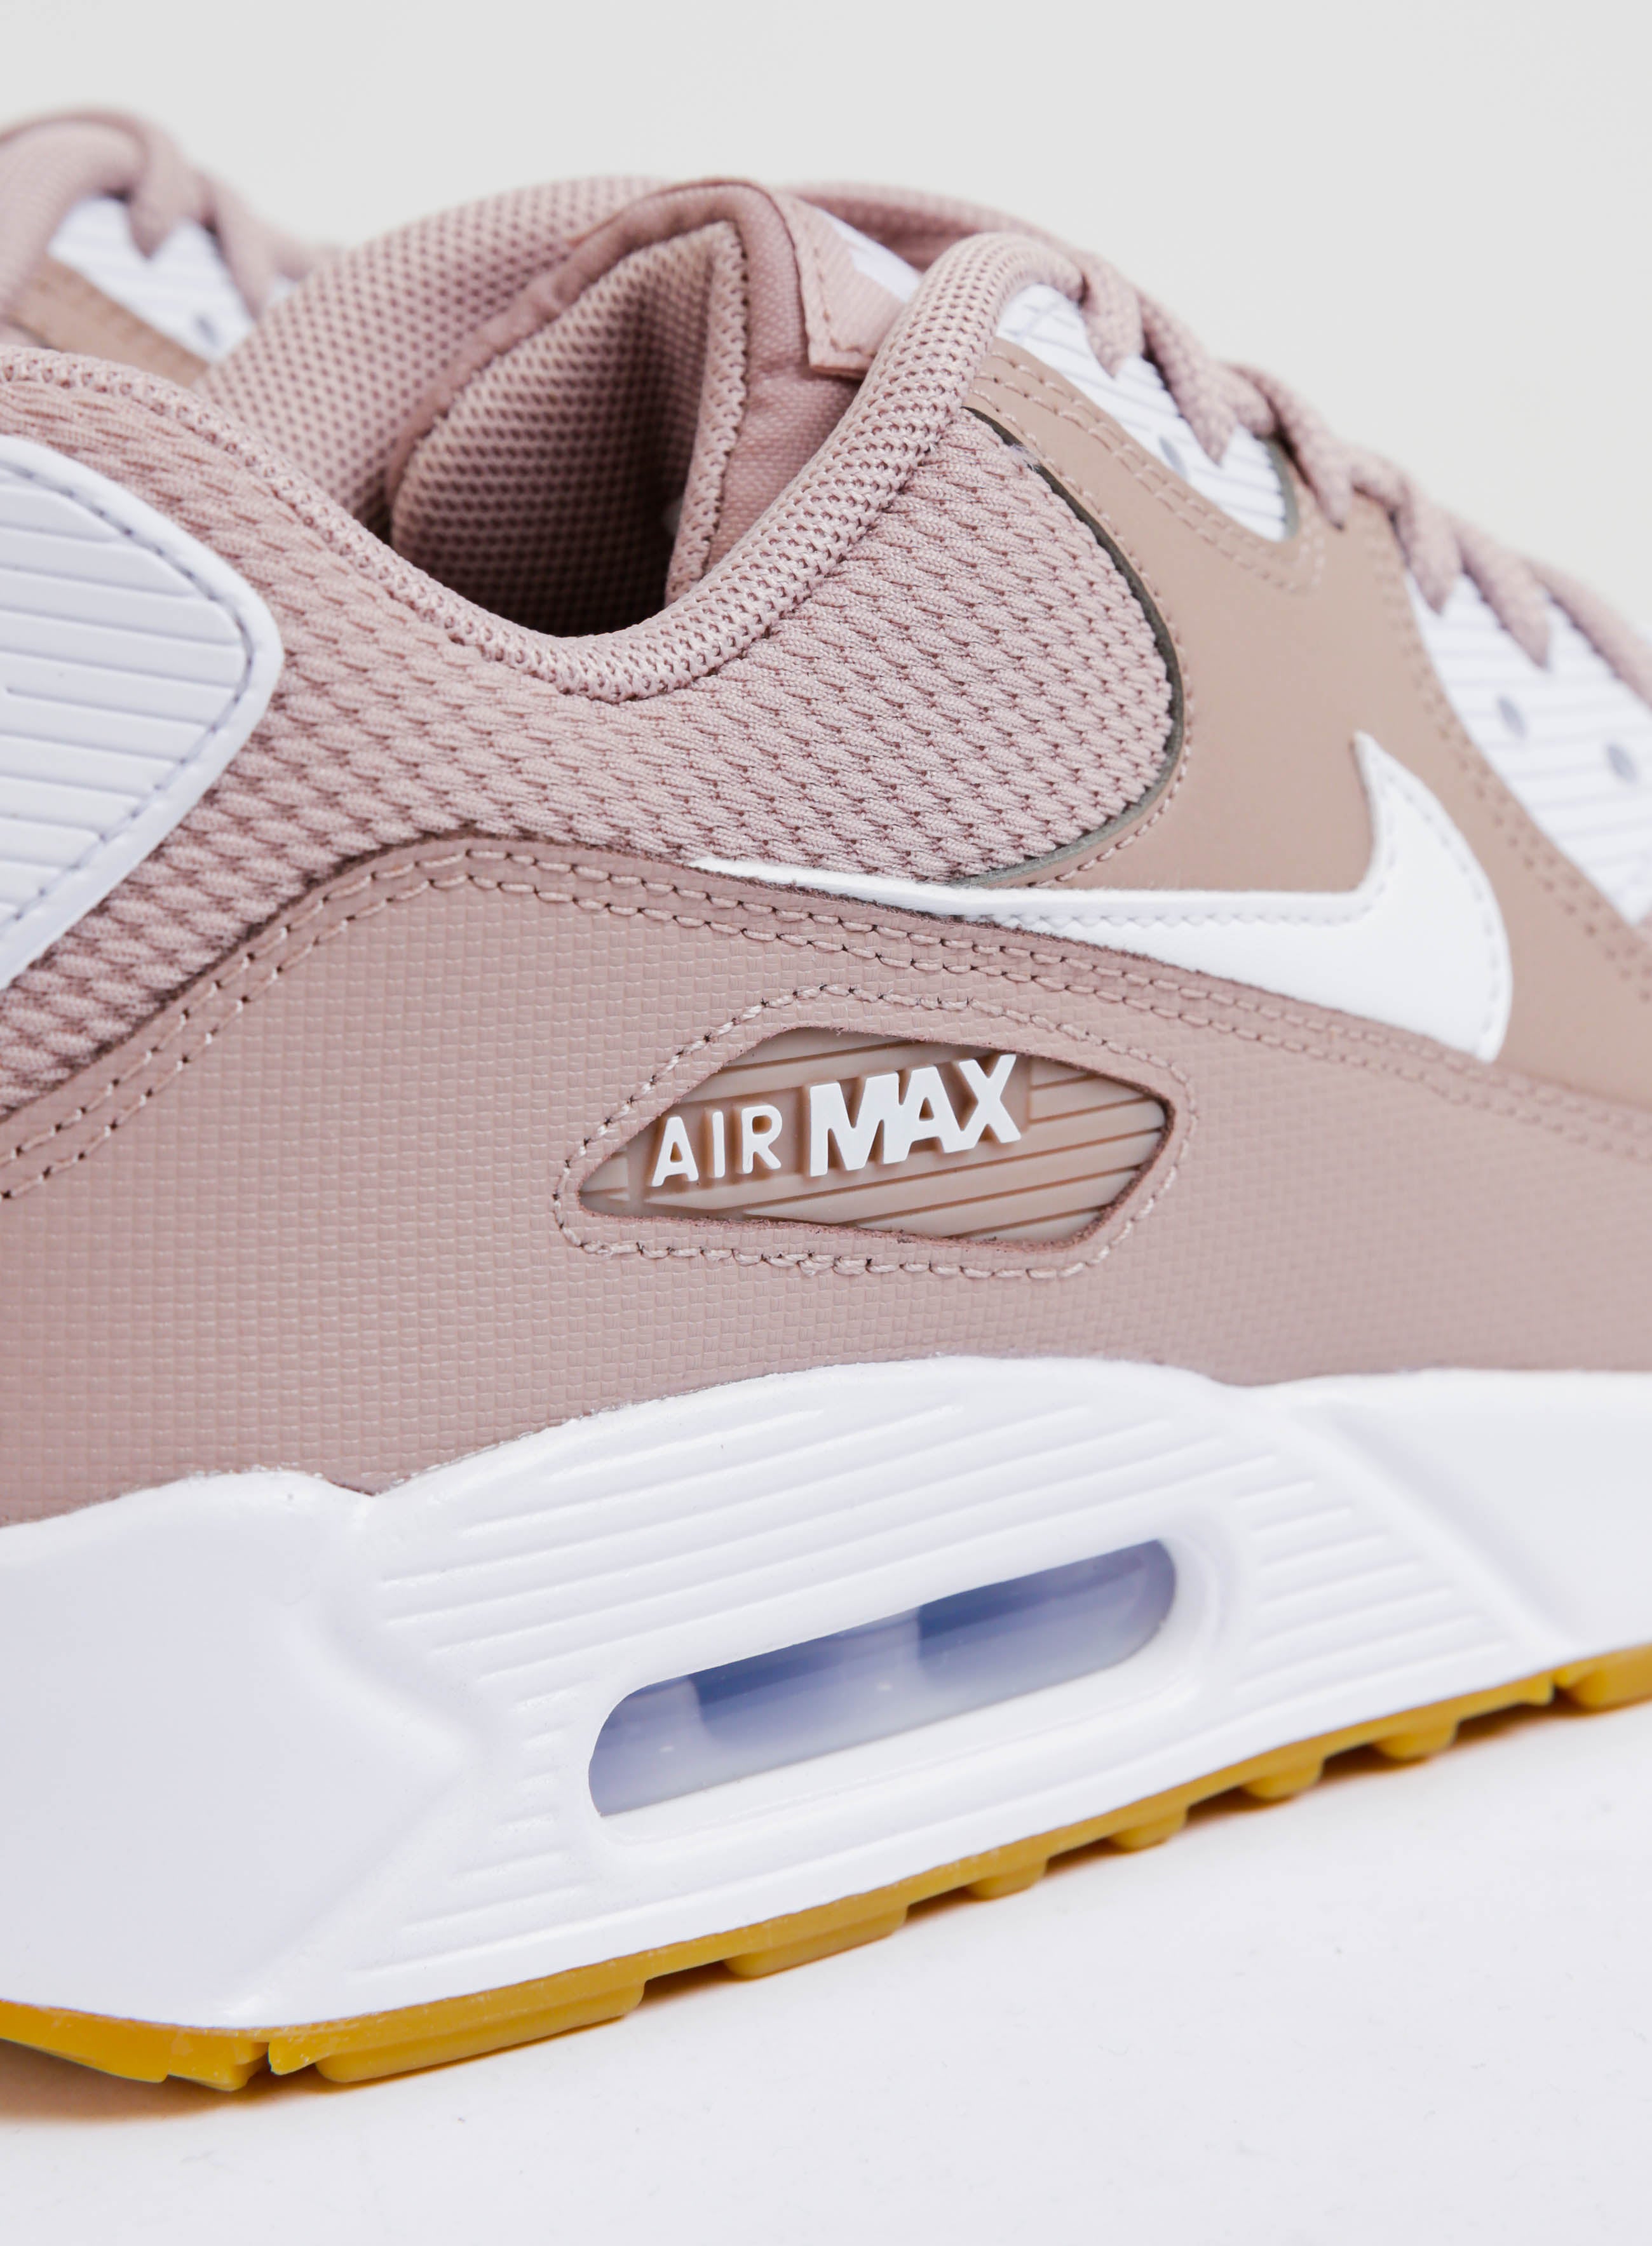 Womens Air Max 90 Sneakers in Taupe & White